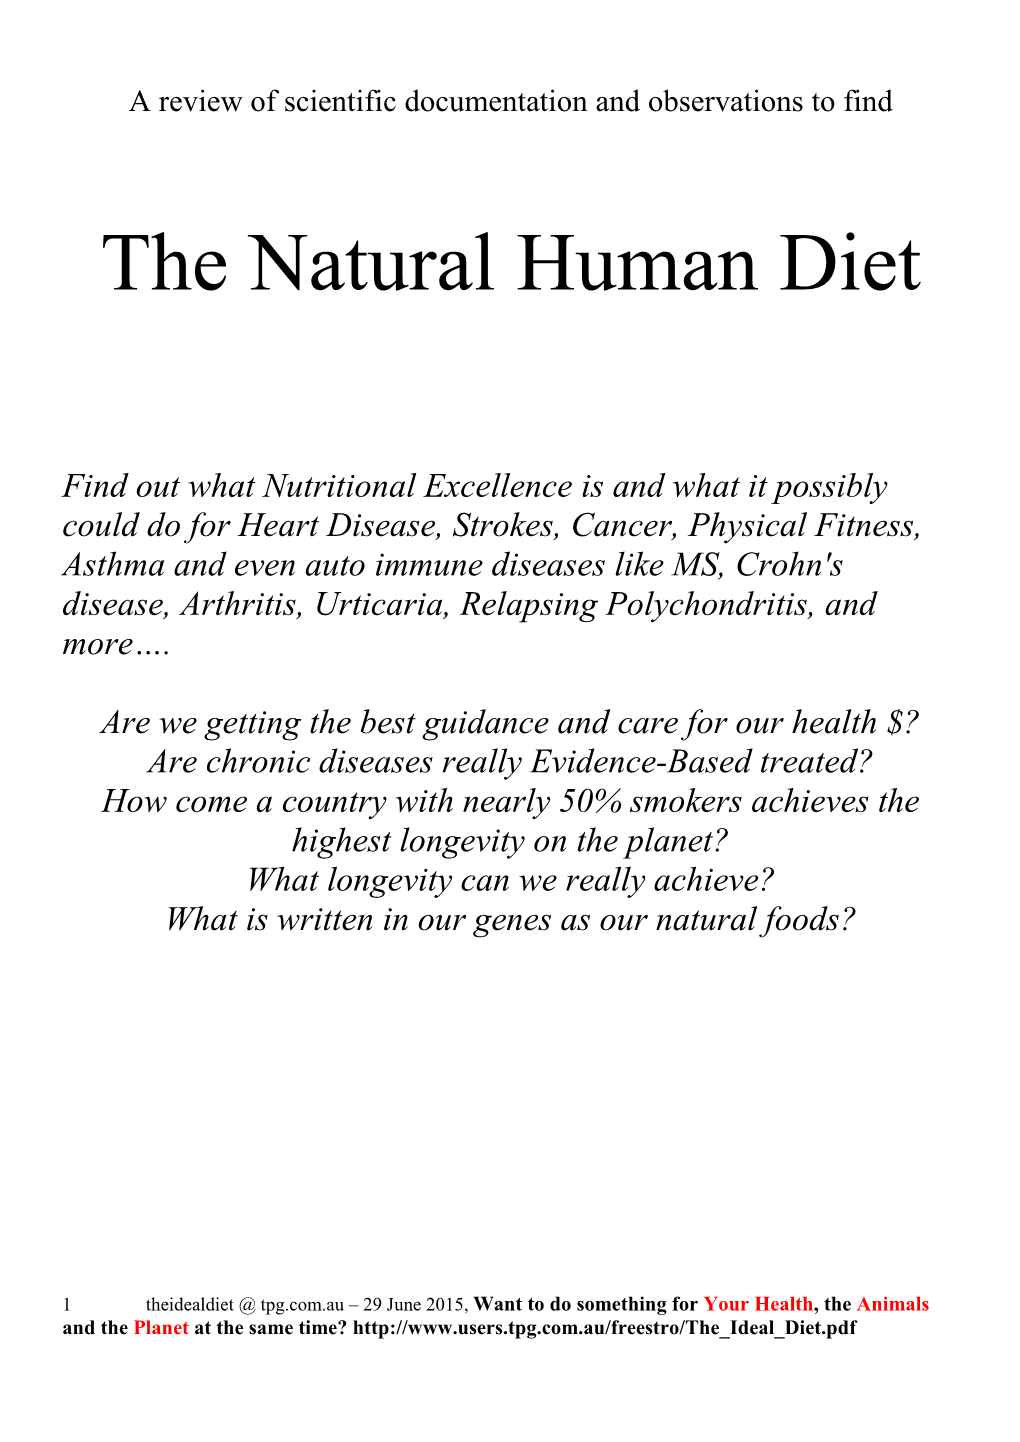 The Natural Human Diet